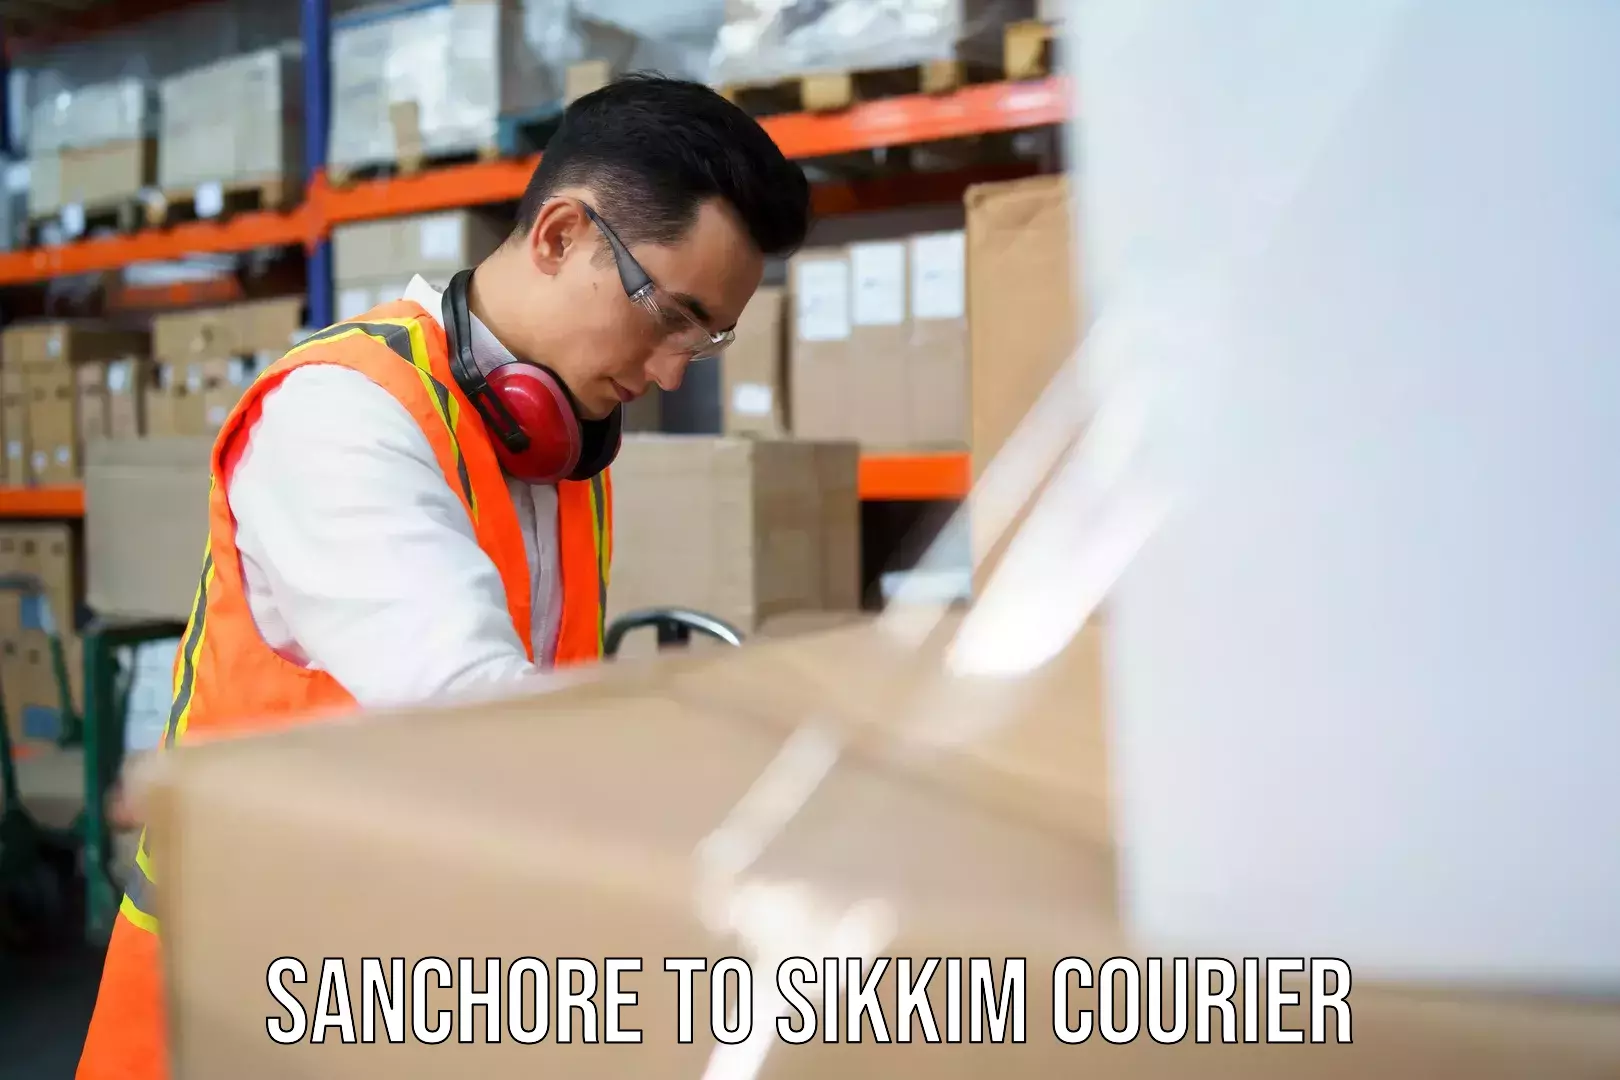 International courier networks Sanchore to Sikkim